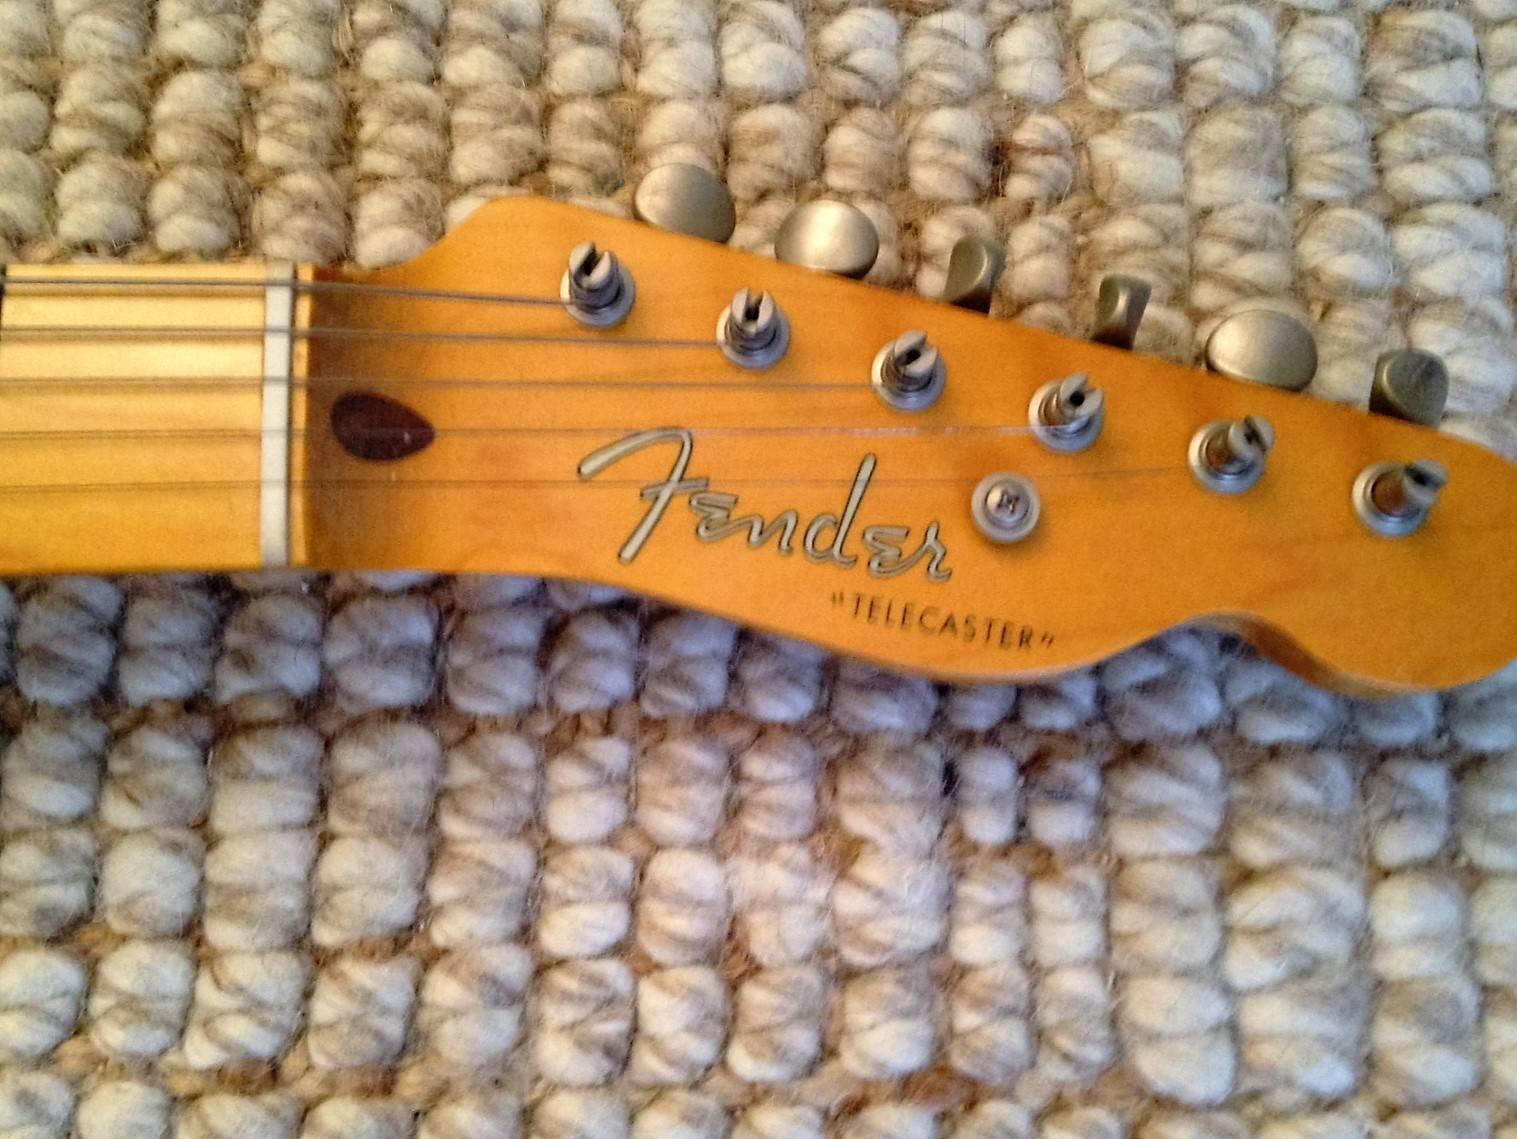 Fender Telecaster Guitar Autographed by Bruce Springsteen In Excellent Condition For Sale In Mount Penn, PA